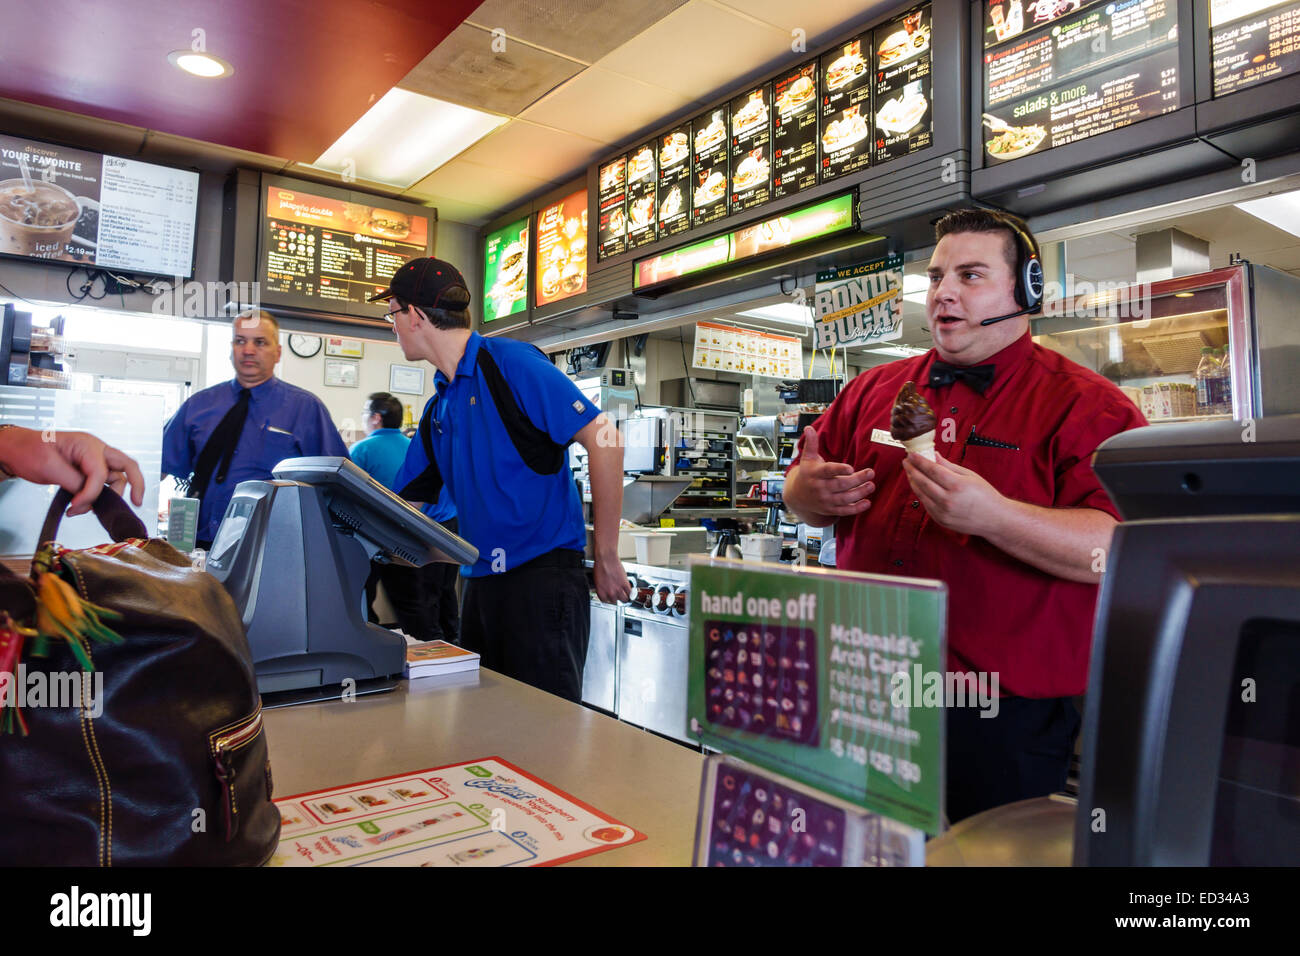 Illinois Gibson City,McDonald's,fast food,restaurant restaurants dining cafe cafes,counter,man men male,employee employees worker workers working staf Stock Photo